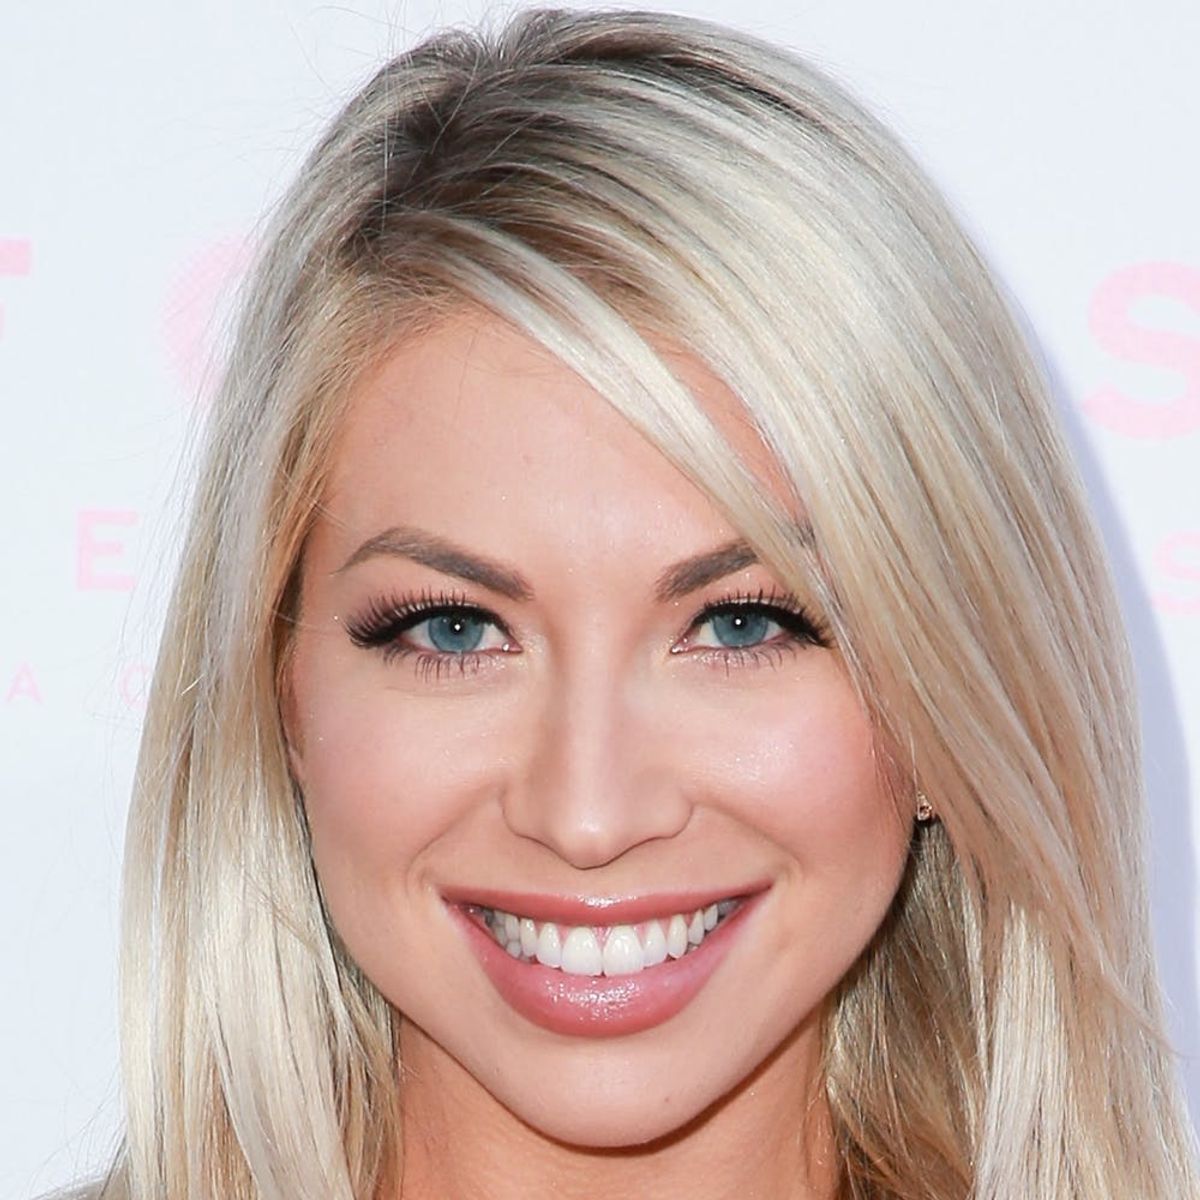 “Vanderpump Rules” Star Stassi Schroeder Loses Endorsements Over Controversial Remarks on the #MeToo Campaign